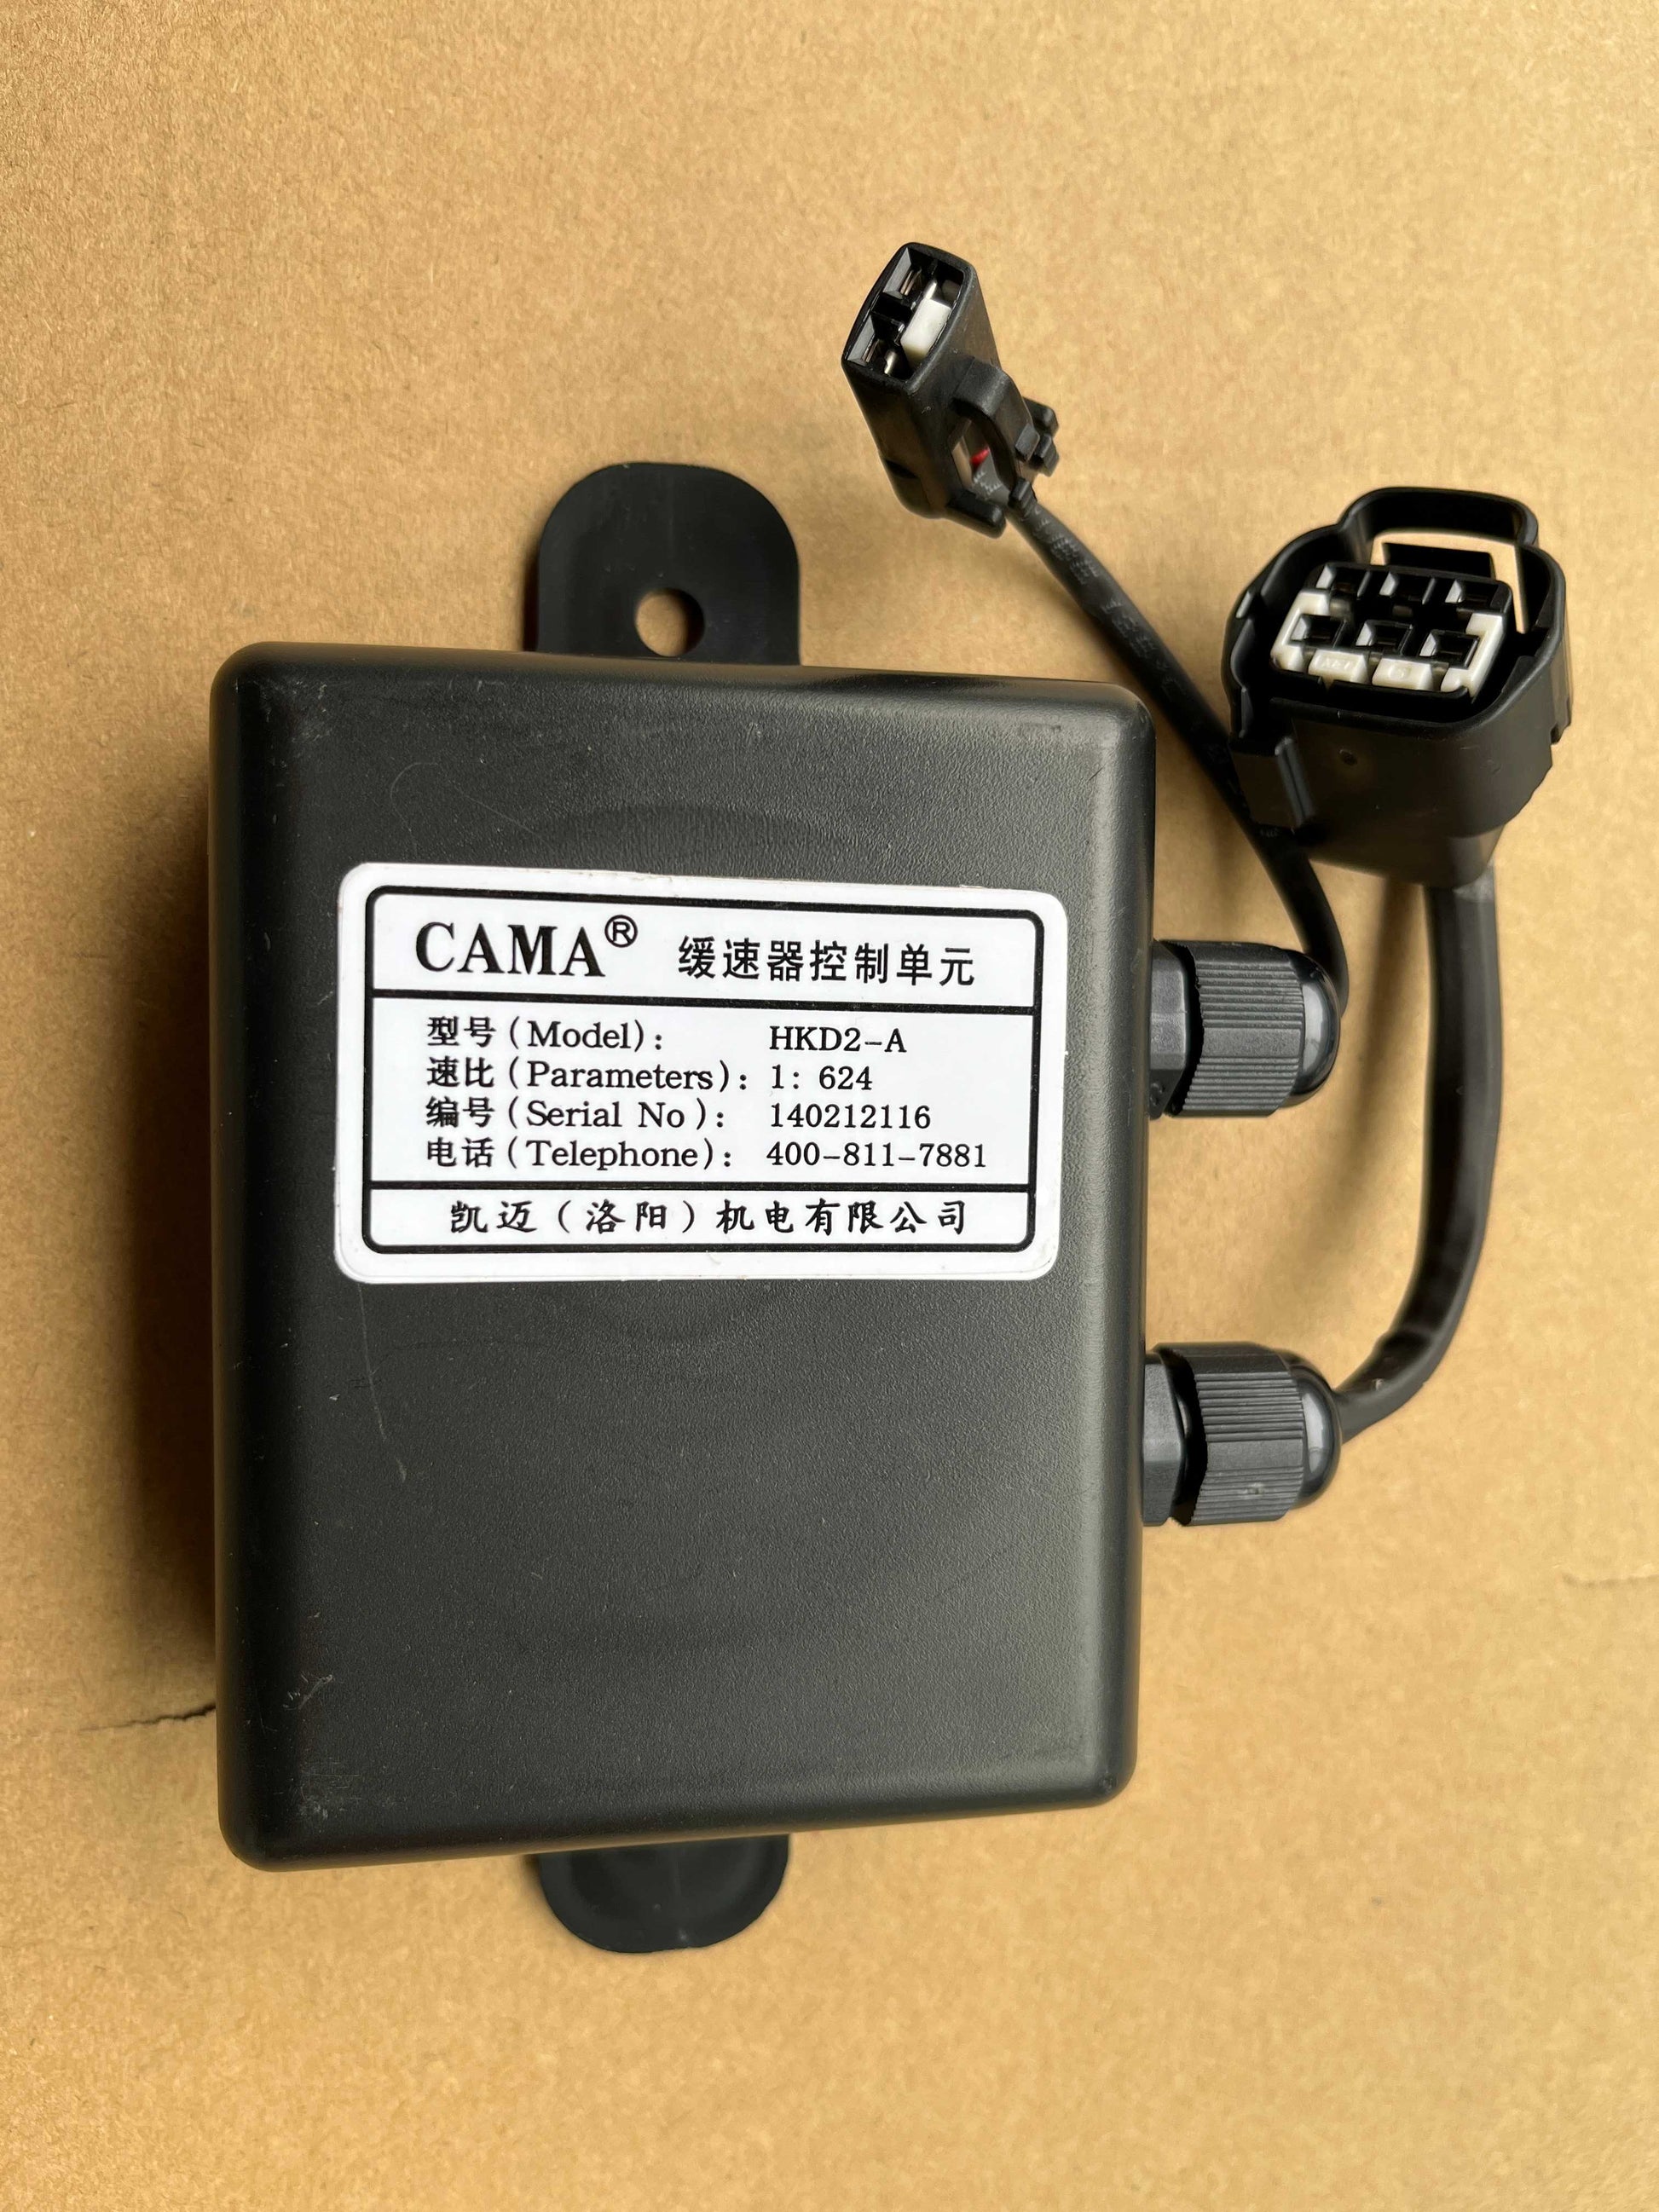 OEM: HKD2-A 1:624 140212116 CAMAMaterial: ABS MetalColor: Black SilverOrigin: Made in ChinaWeight: 400gPacking List: 1* Retarder Controll Unit More ServiceWe can provide OEM Manufacturing serviceWe can Be your one-step solution for Auto PartsWe can provide technical scheme for you Feel Free to Contact Us, We will get back to you as soon as possible.